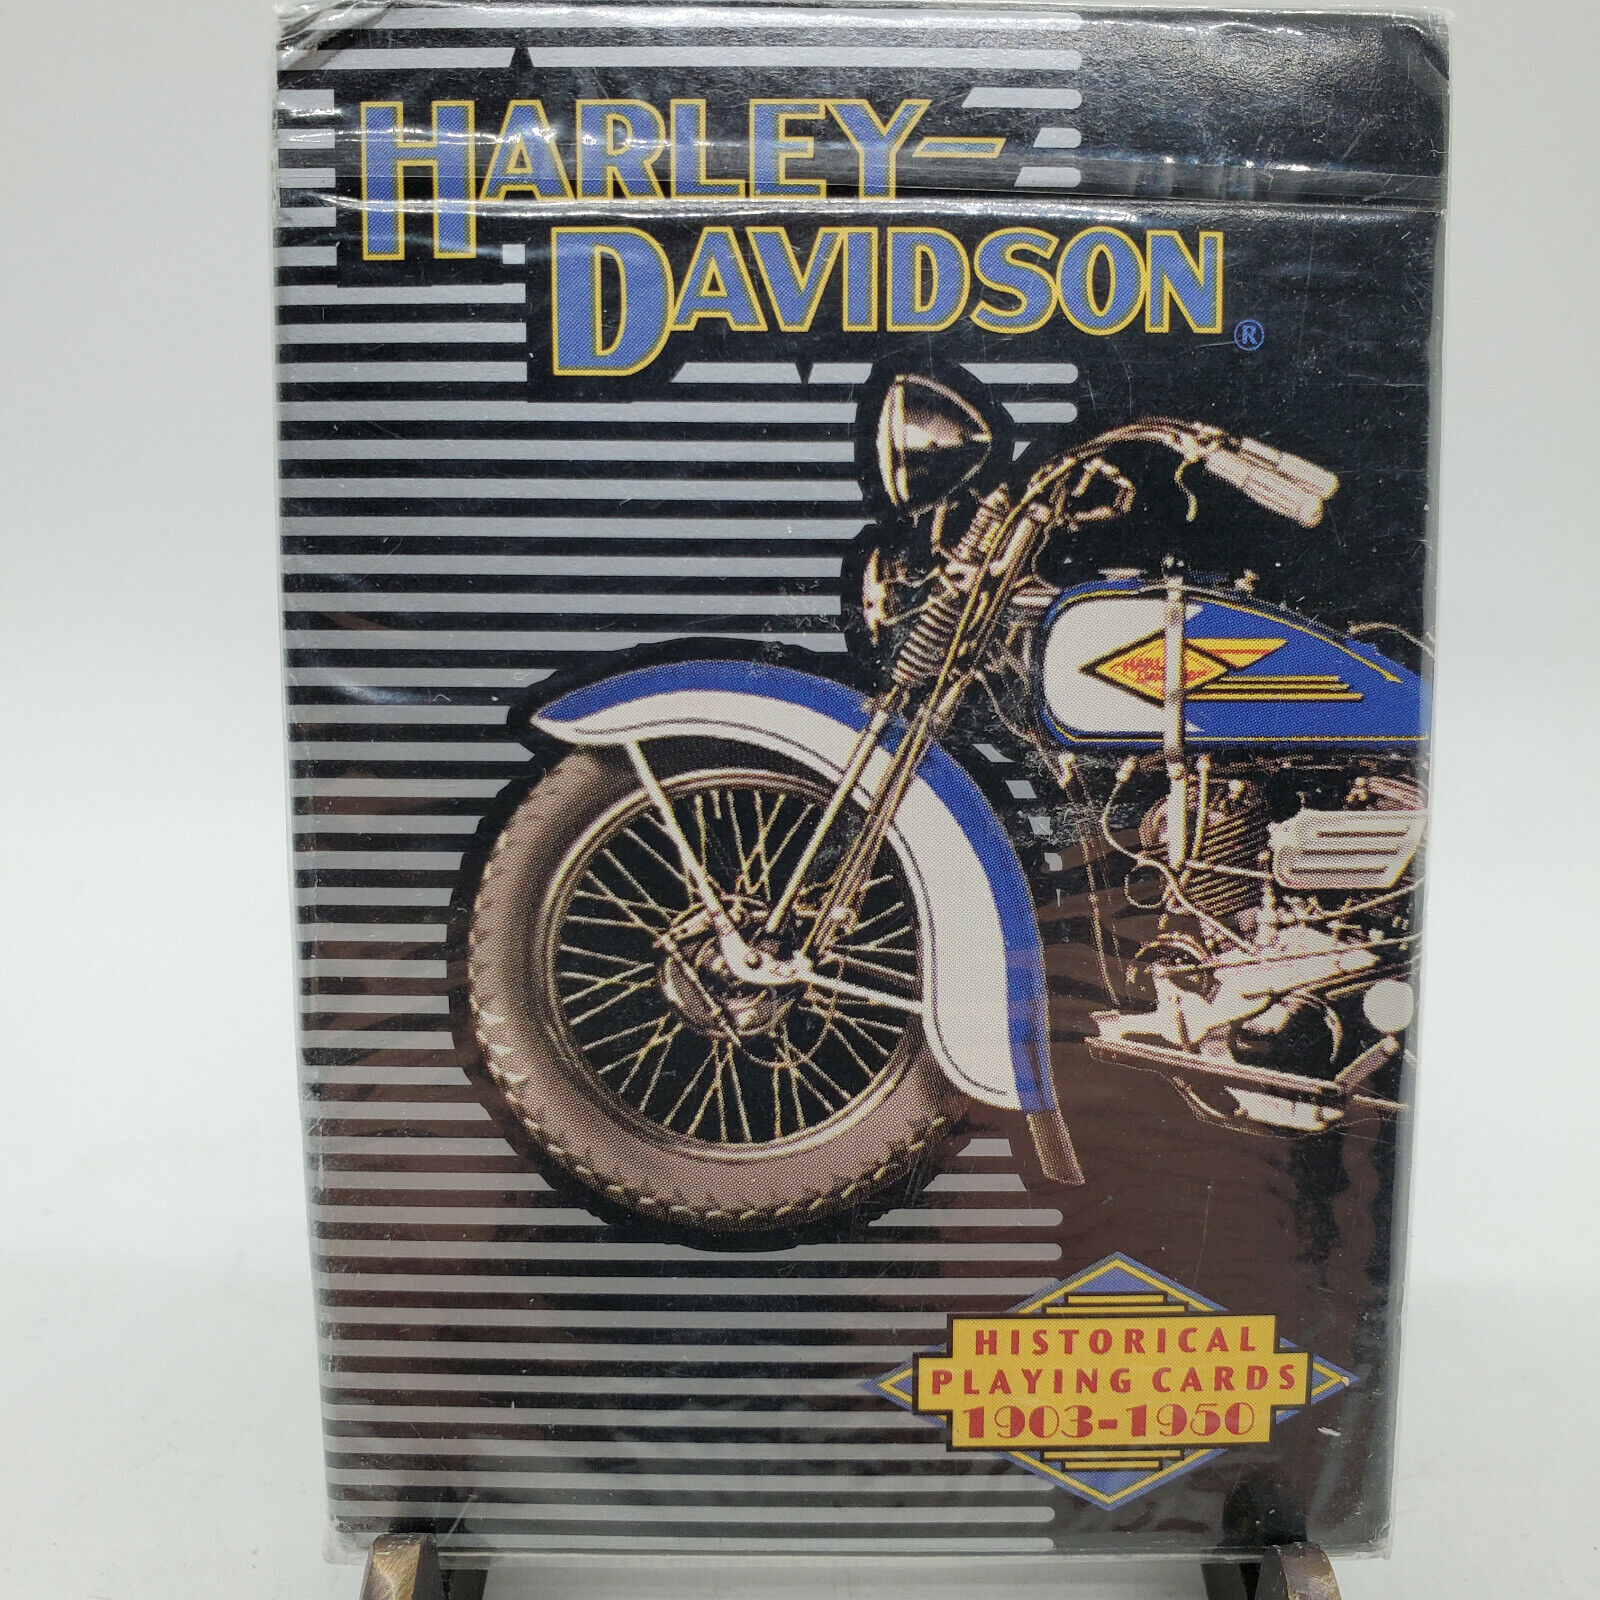 Harley-Davidson Historical Playing Cards 1903-1950 New Sealed